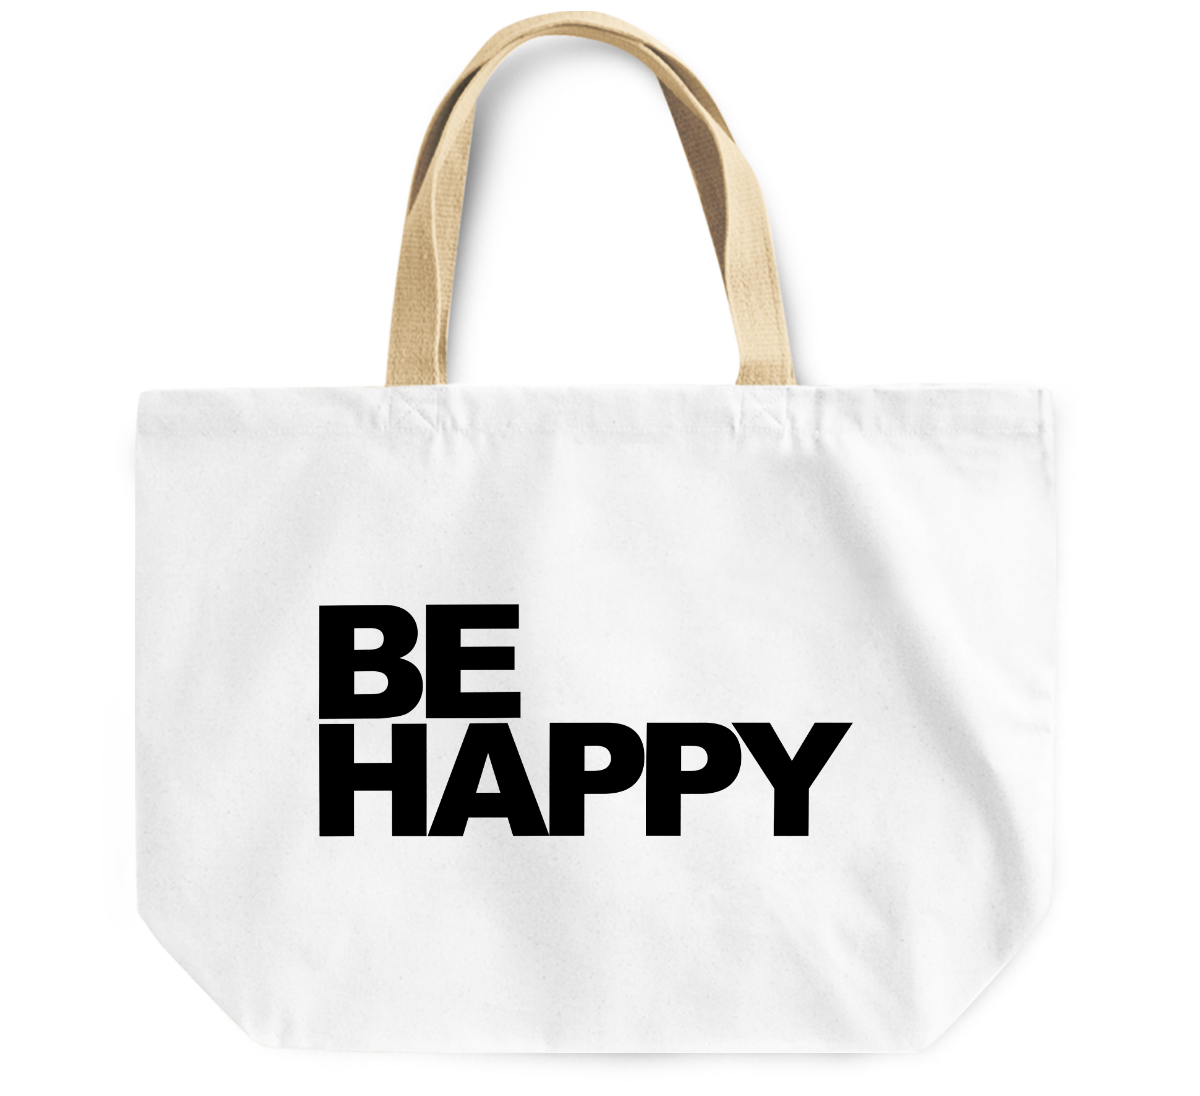 Tote Bag Be Happy bag Reusable Canvas Grocery Shopping Bag - Totes ...